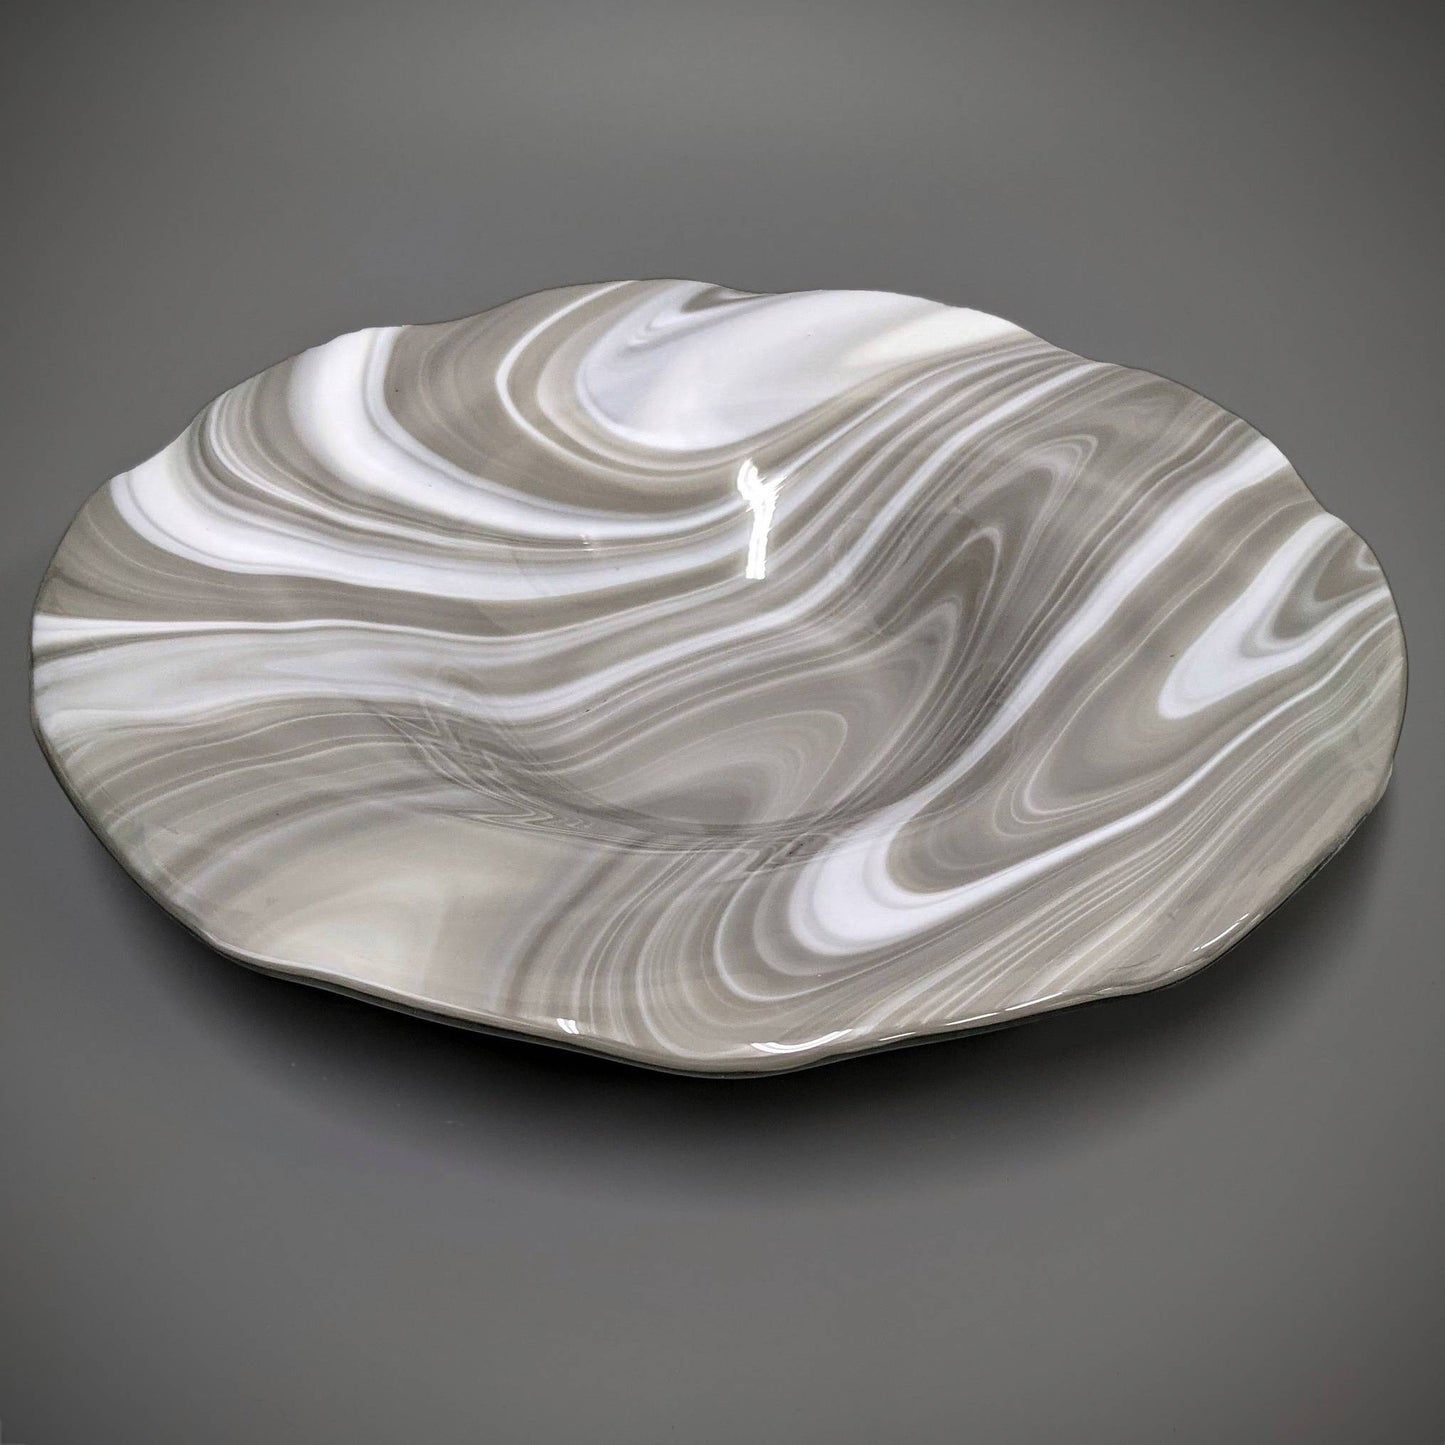 Modern Handcrafted Art Glass Bowl in Gray and White